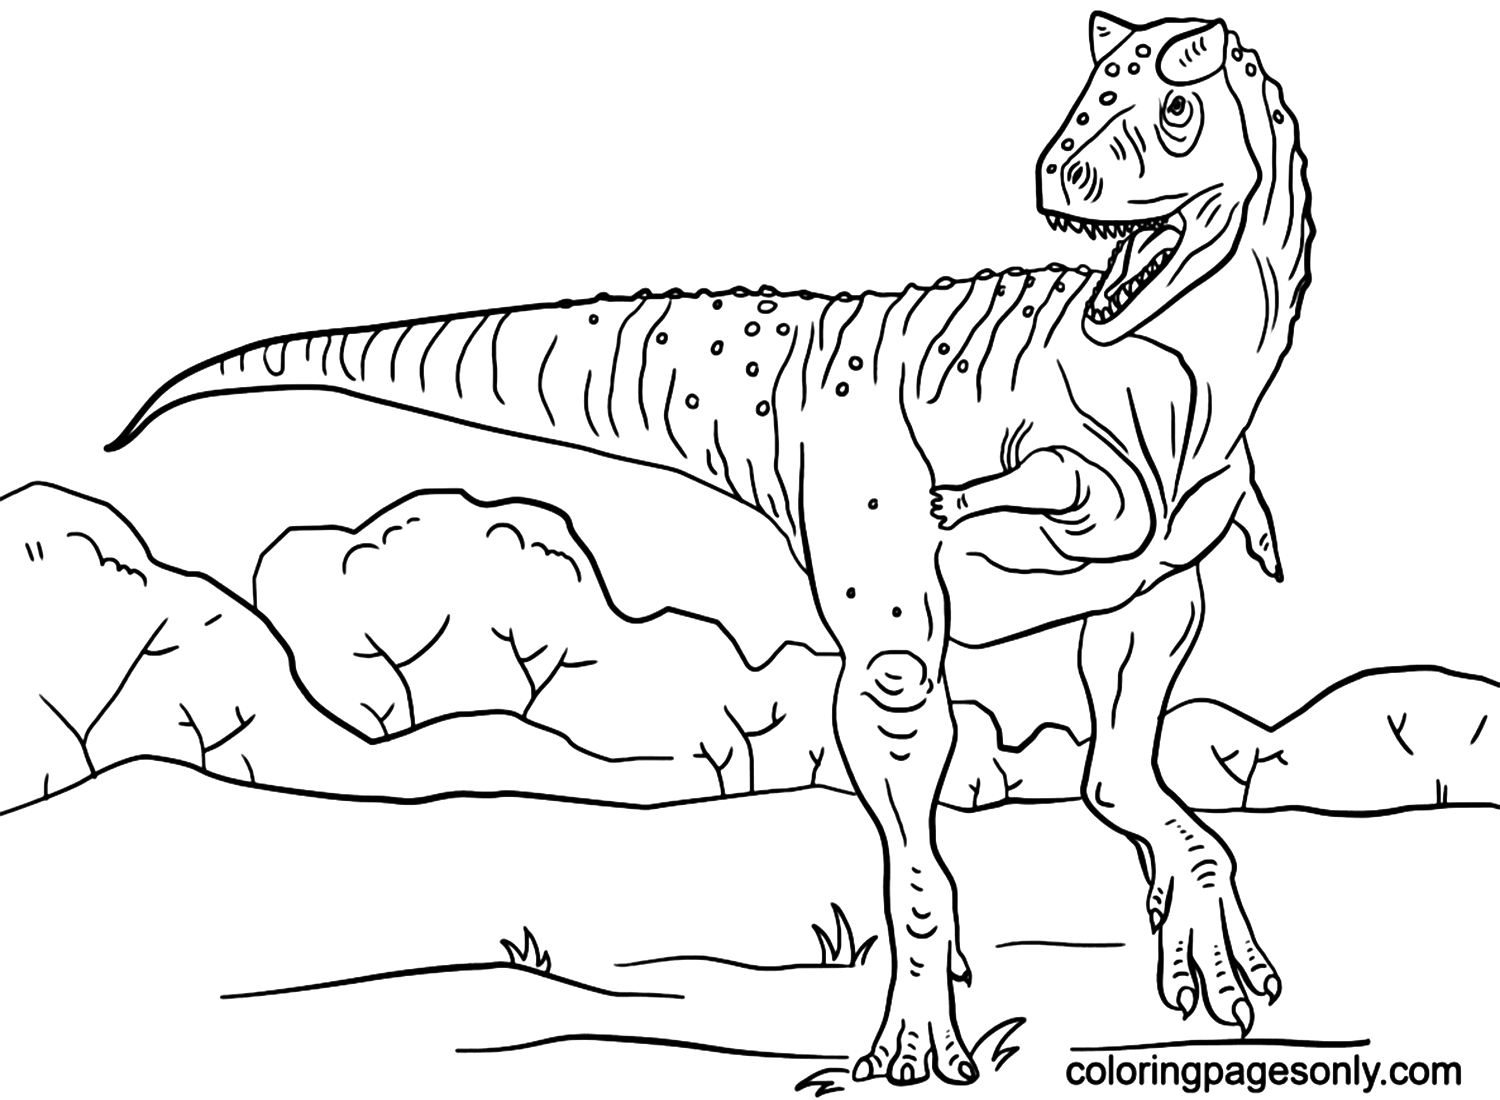 Free Download Jurassic Park Carnotaurus Coloring Pages